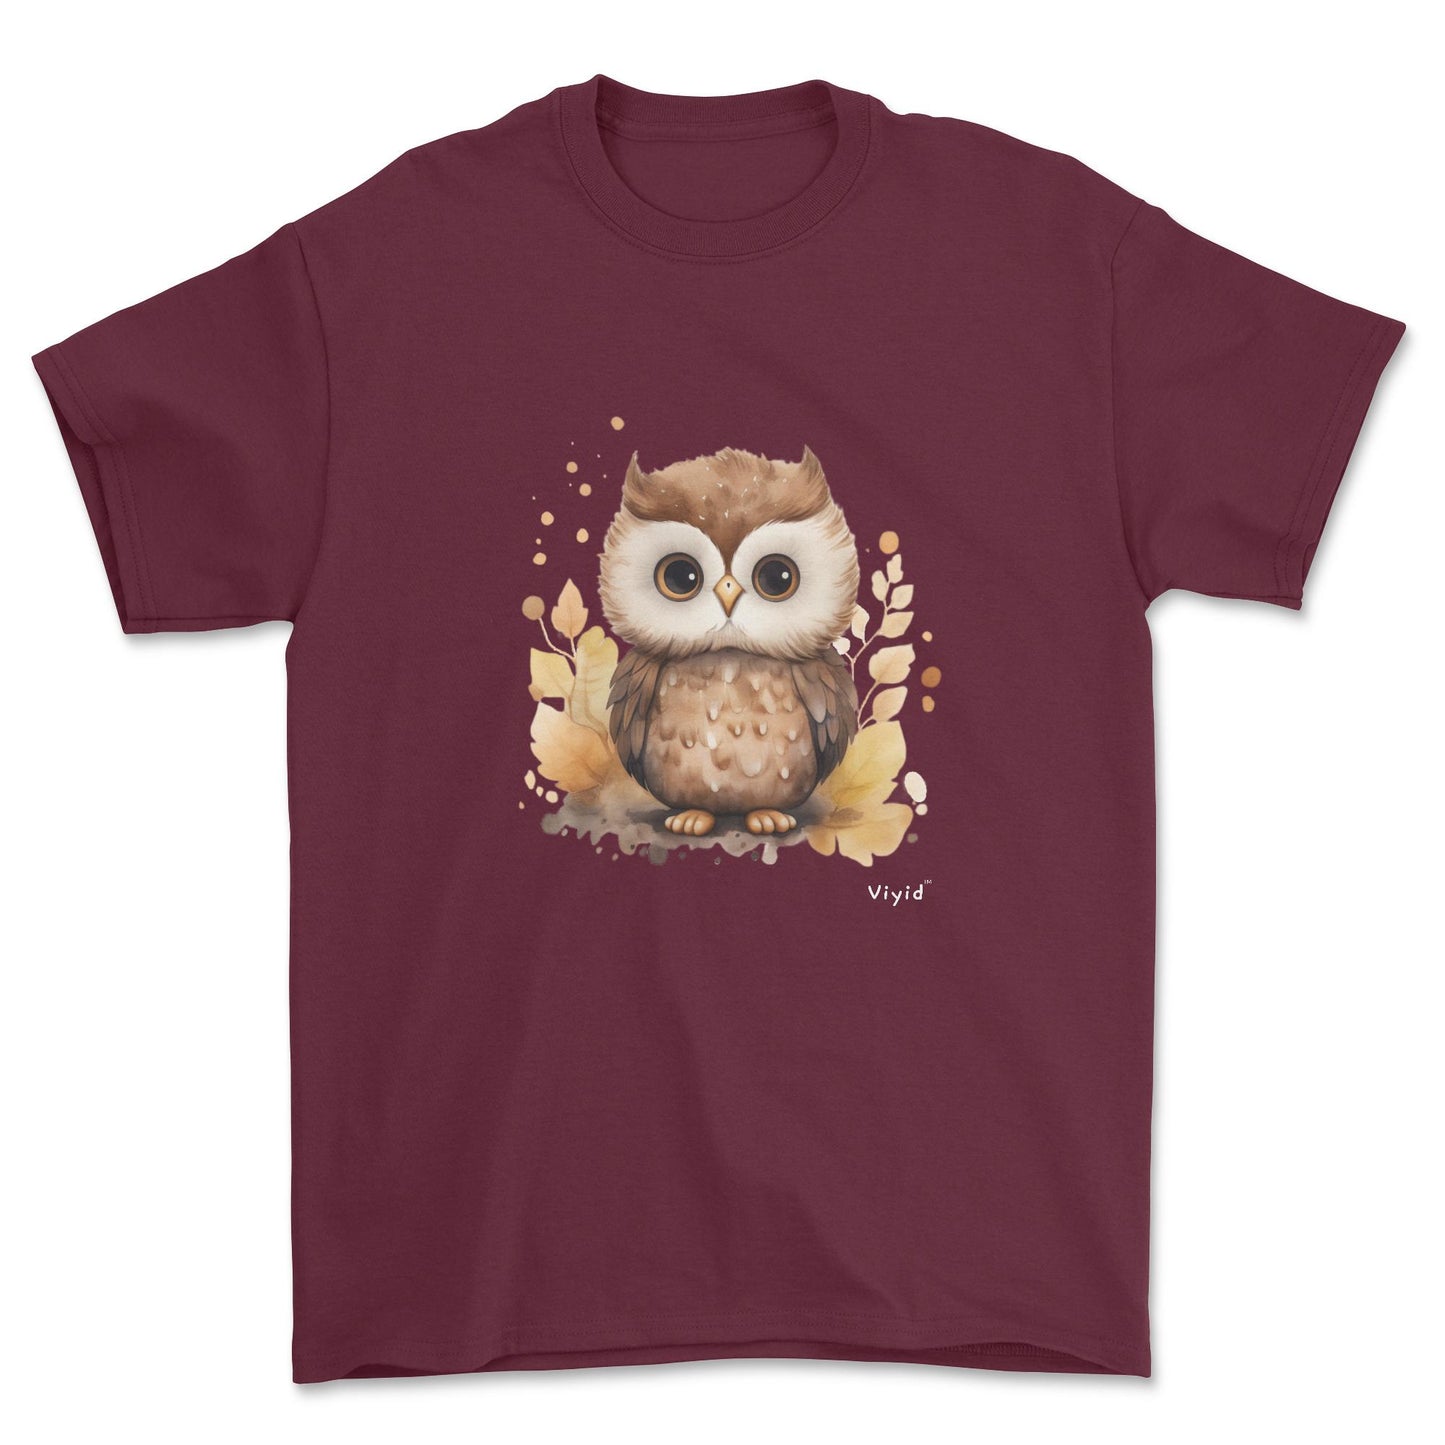 nocturnal owl youth t-shirt maroon